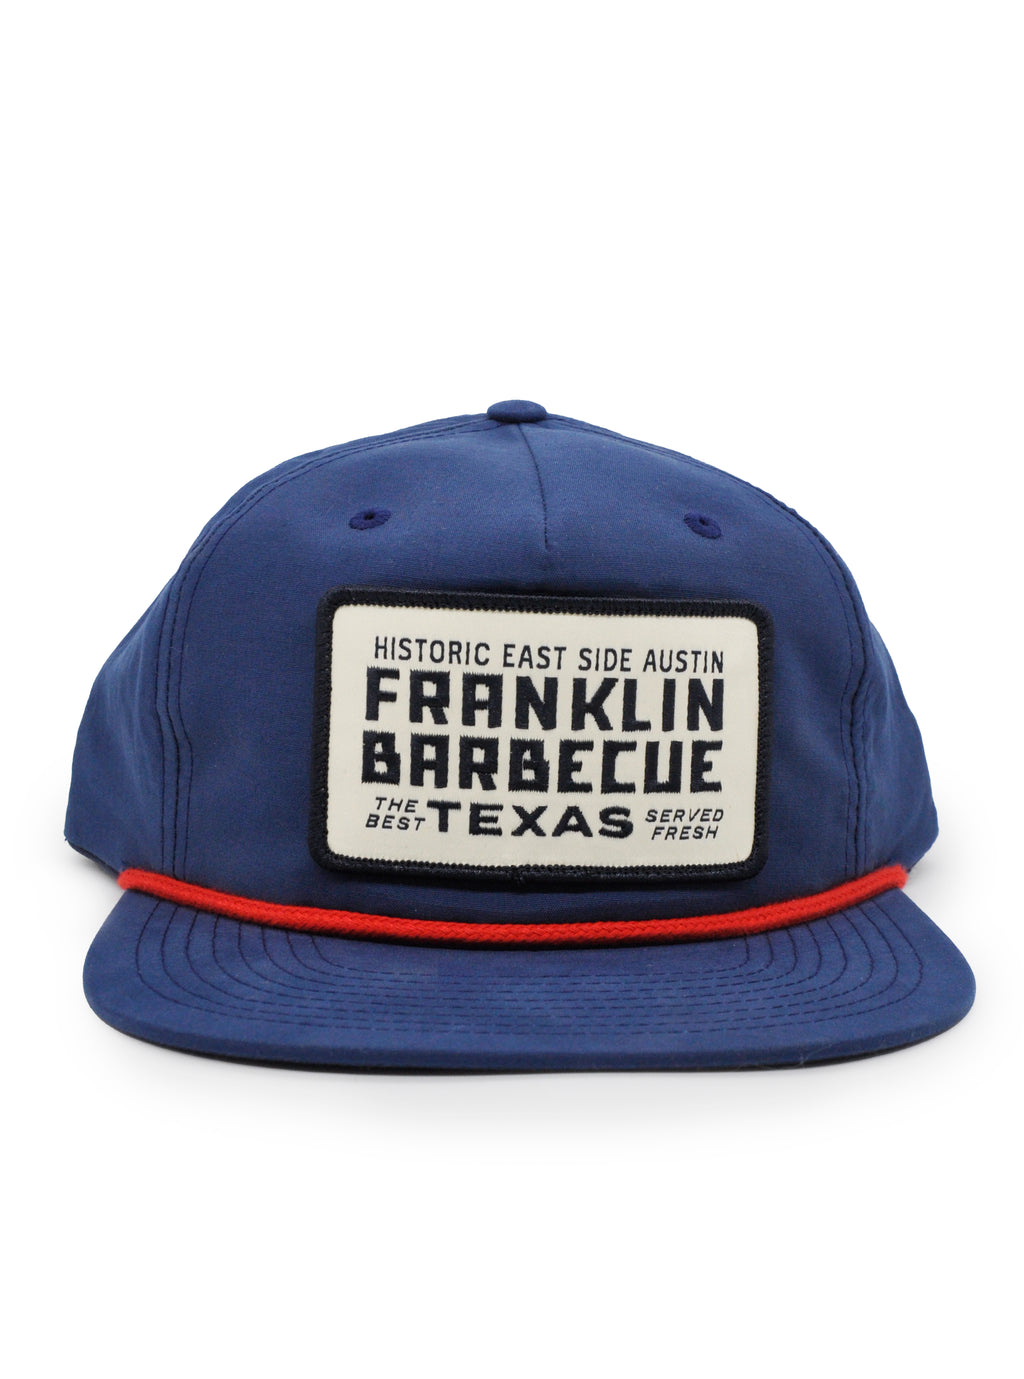 Navy blue baseball hat with a red band over the brim. A white, black bordered patch on the hat reads in black letters: "Historic East Side Austin Franklin Barbecue Texas. The Best. Served Fresh.